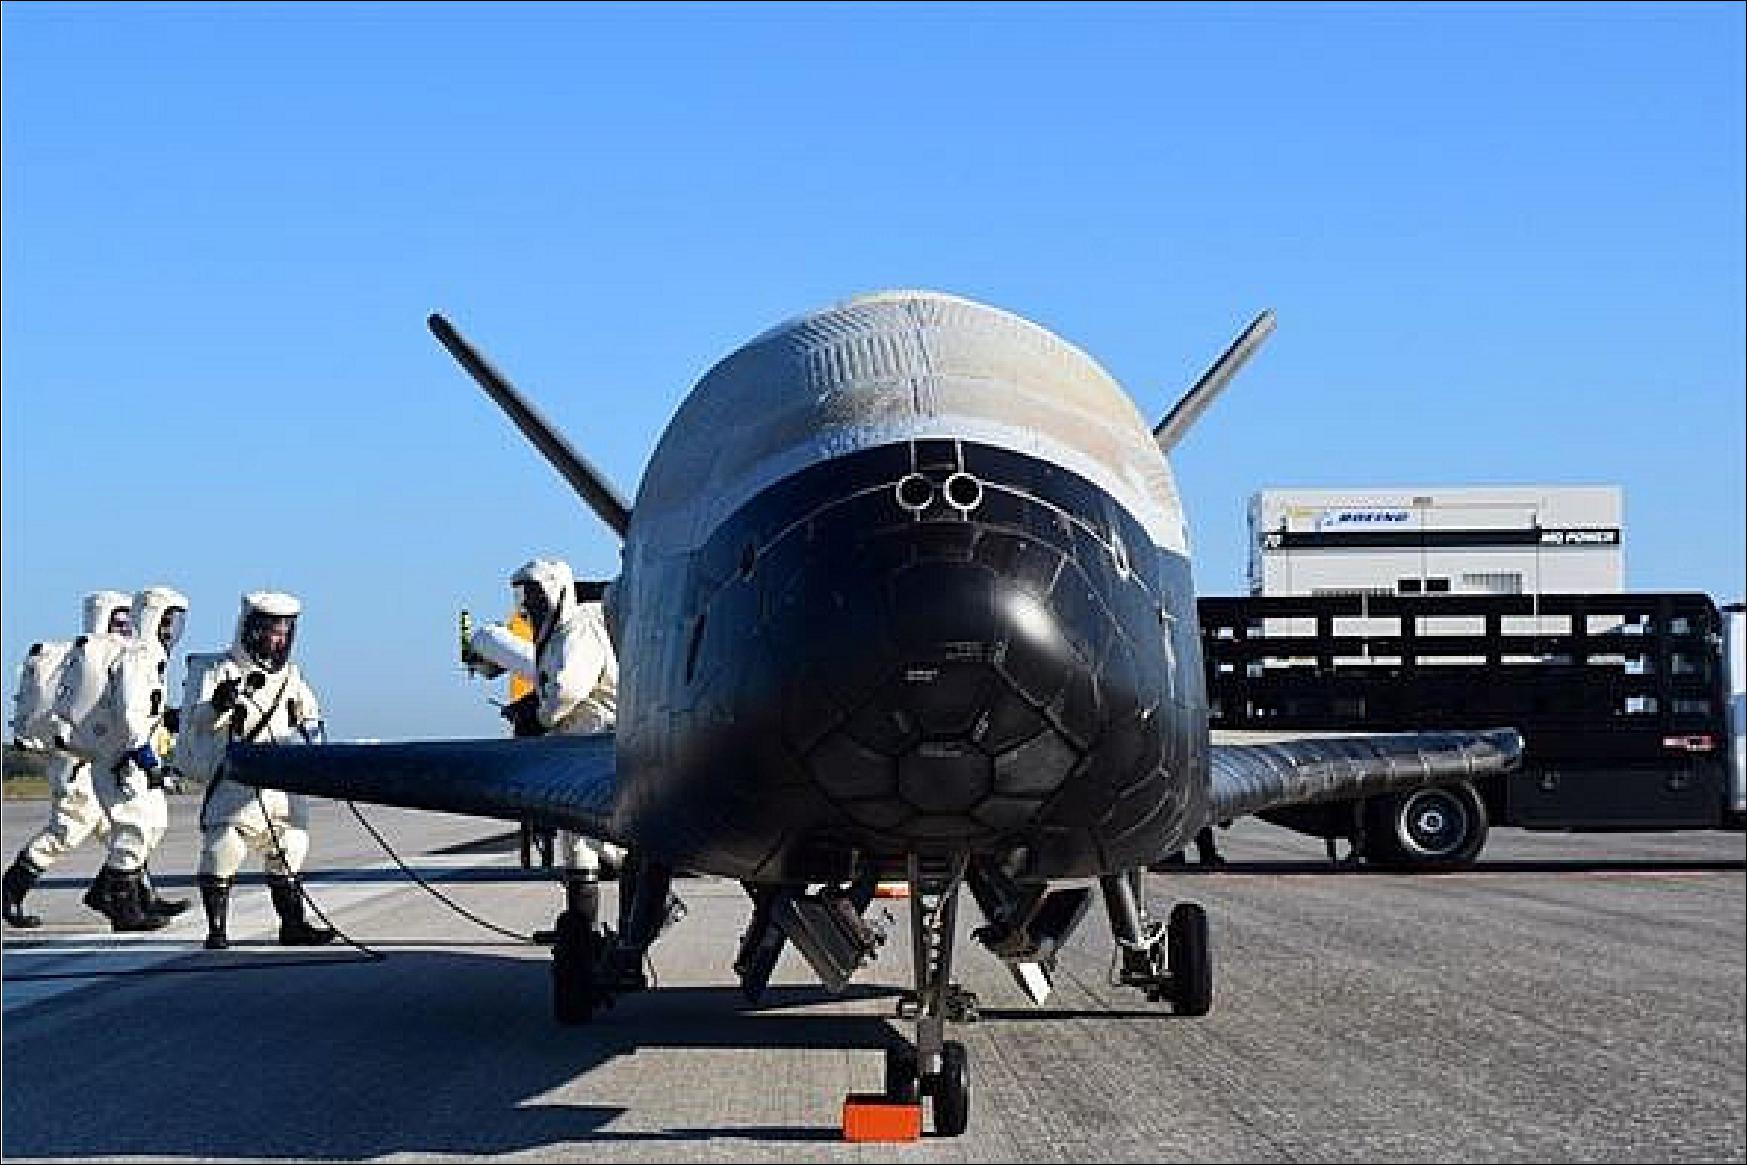 Figure 1: The X-37B Orbital Test Vehicle-4 landed at Kennedy Space Center (image credit: USAF)